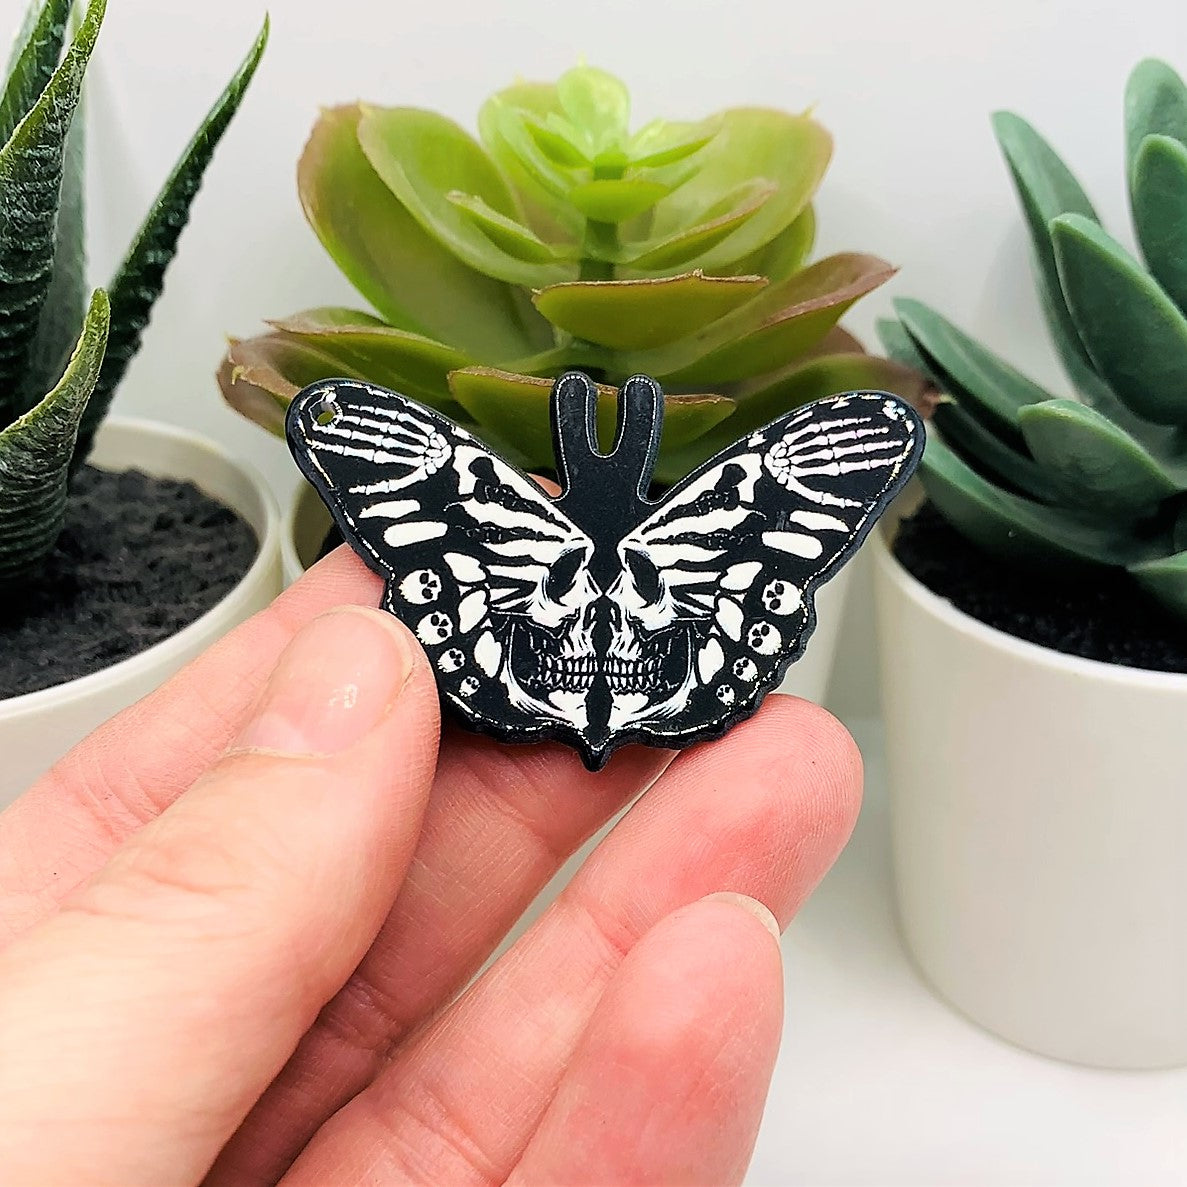 1, 4 or 20 Pieces: Black and White Moth with Bones - Double Sided!